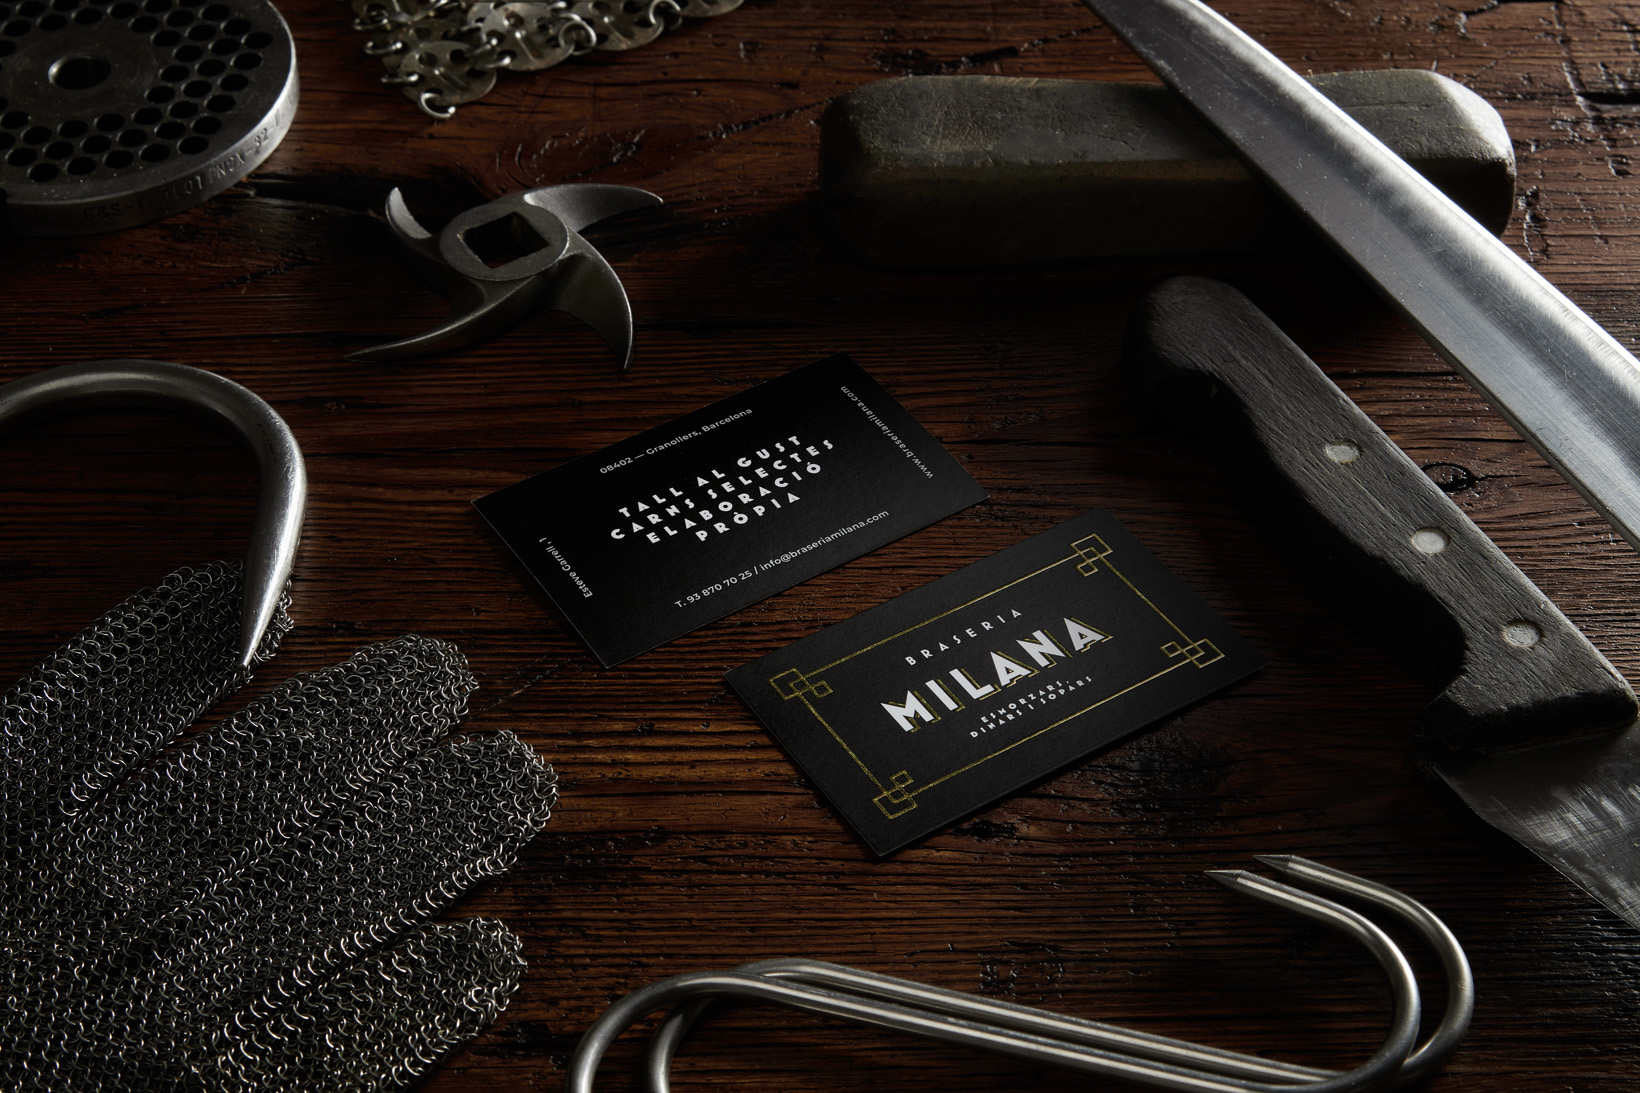 Business cards with new logo of restaurant grill Braseria La Milana next to butcher knives and iron gloves